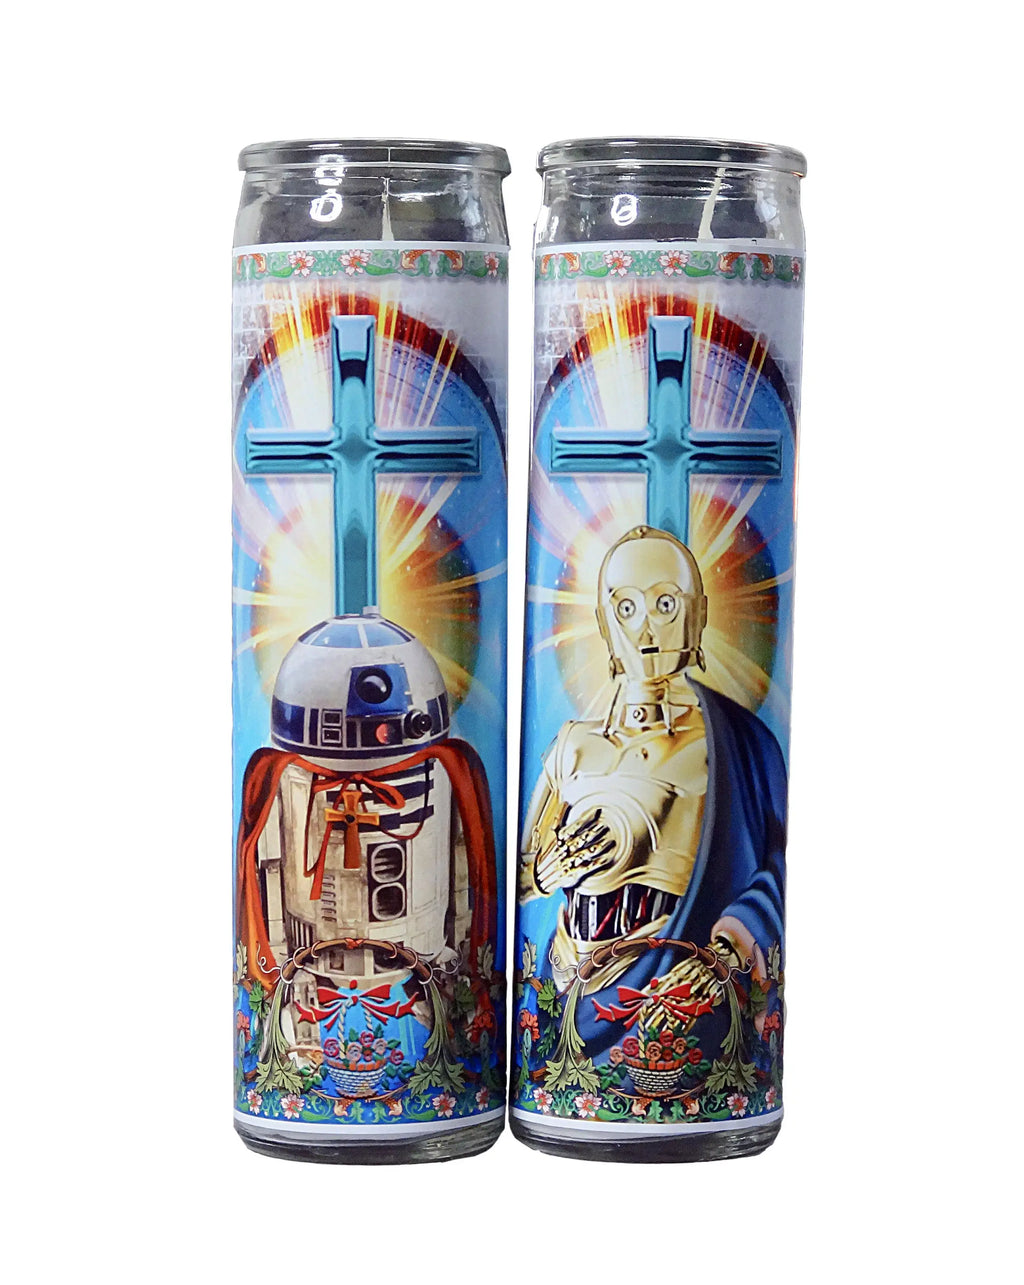 R2-D2 And C-3PO Celebrity Prayer Candle Set